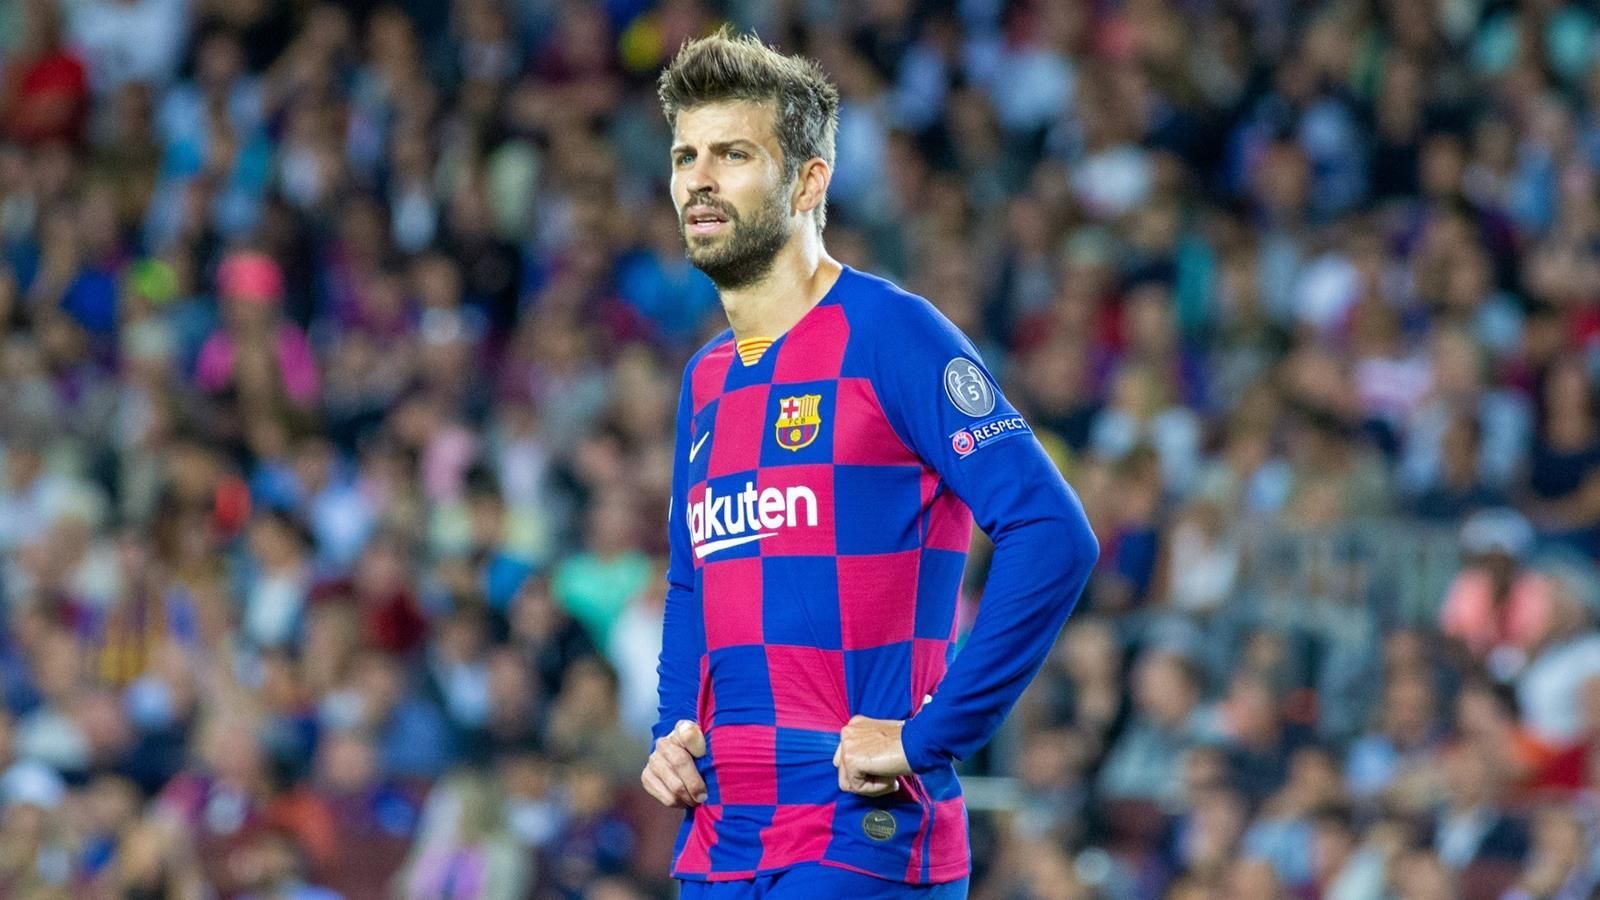 Barcelona defender Gerard Pique seemed to give up hope of winning the LaLiga title